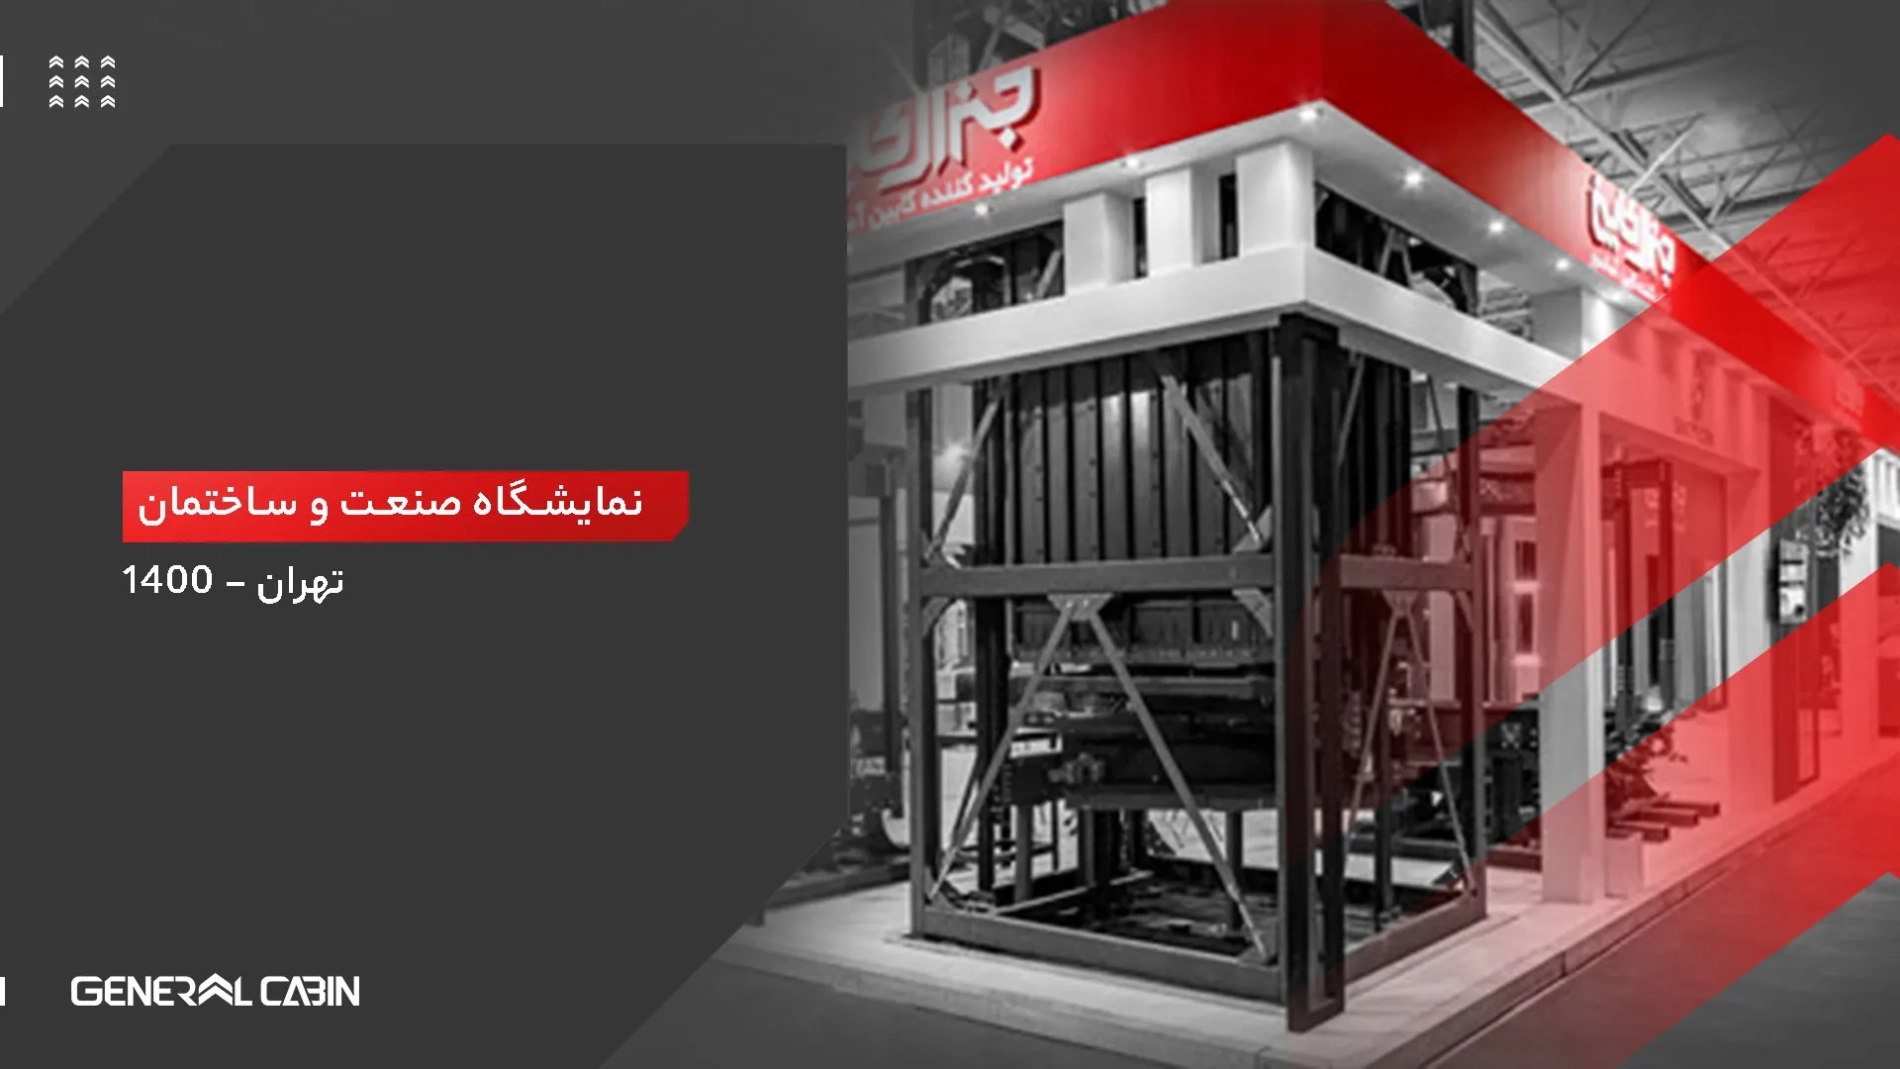 Tehran Industry And Construction Exhibition 1400 Cover Copy